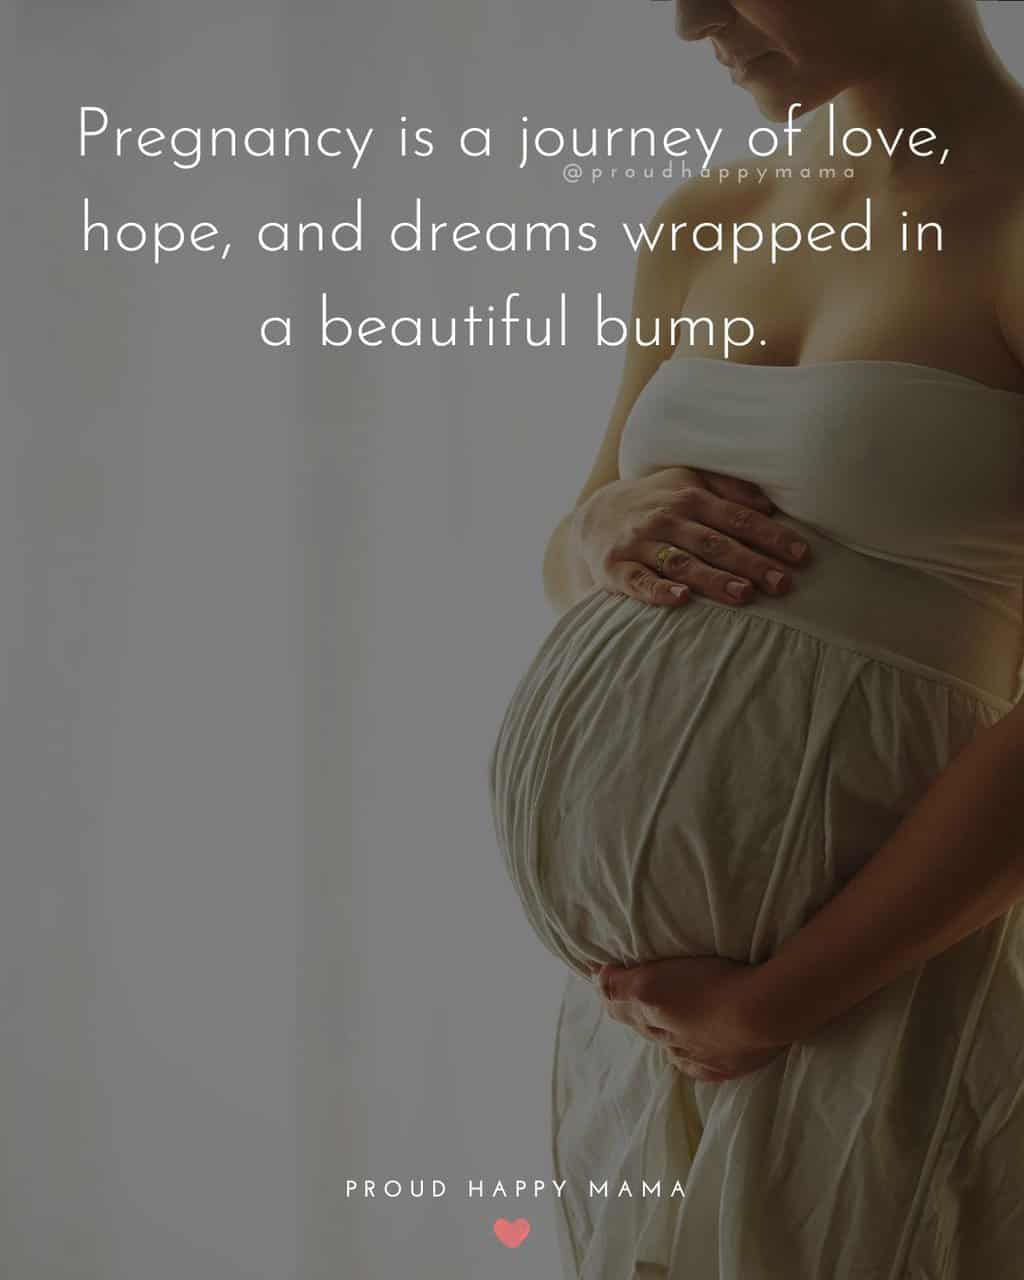 Inspirational pregnancy quotes - Pregnancy is a journey of love, hope, and dreams wrapped in a beautiful bump.